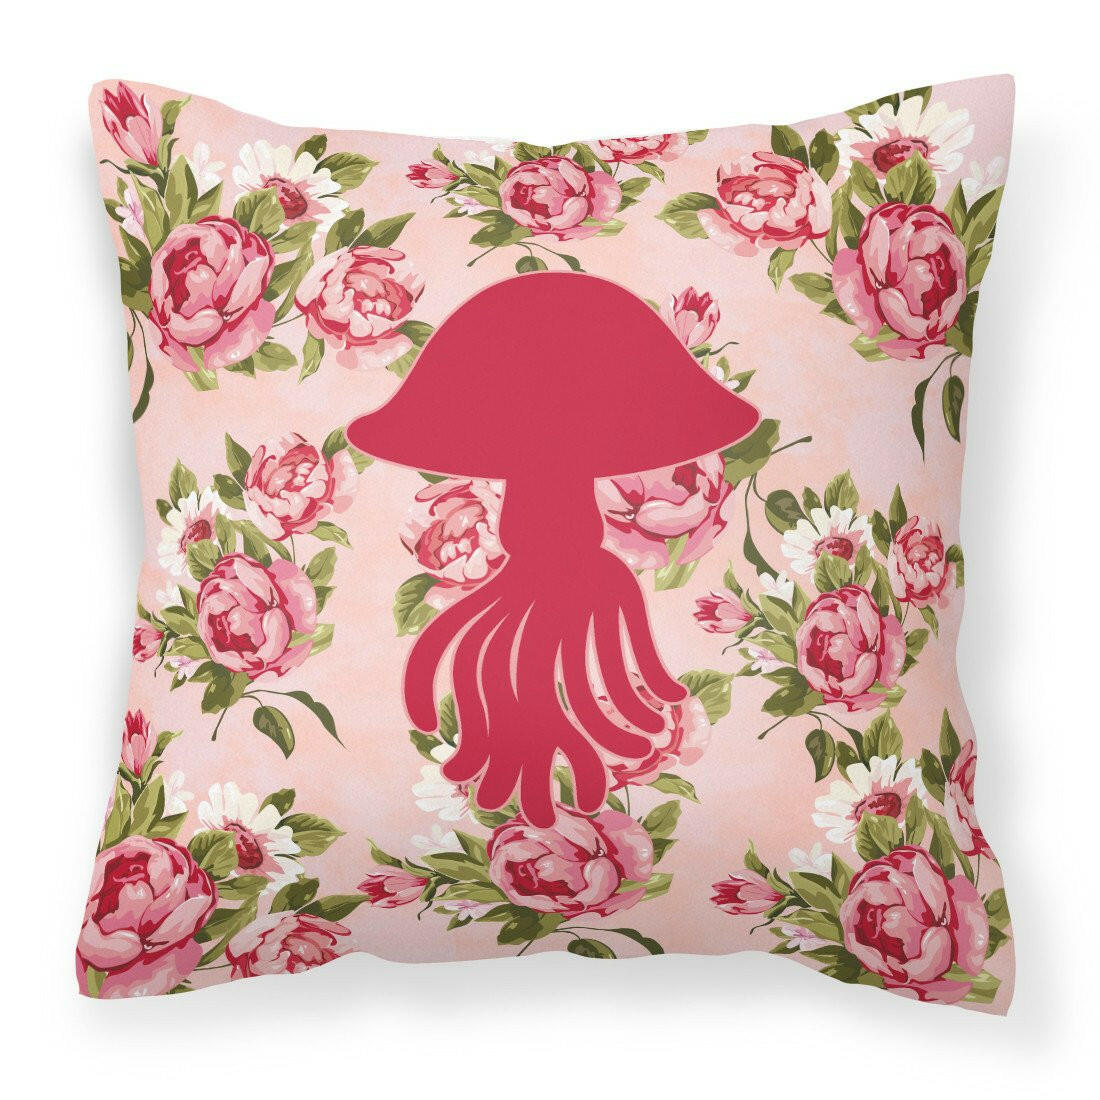 Jellyfish Shabby Chic Pink Roses  Fabric Decorative Pillow BB1089-RS-PK-PW1414 - the-store.com